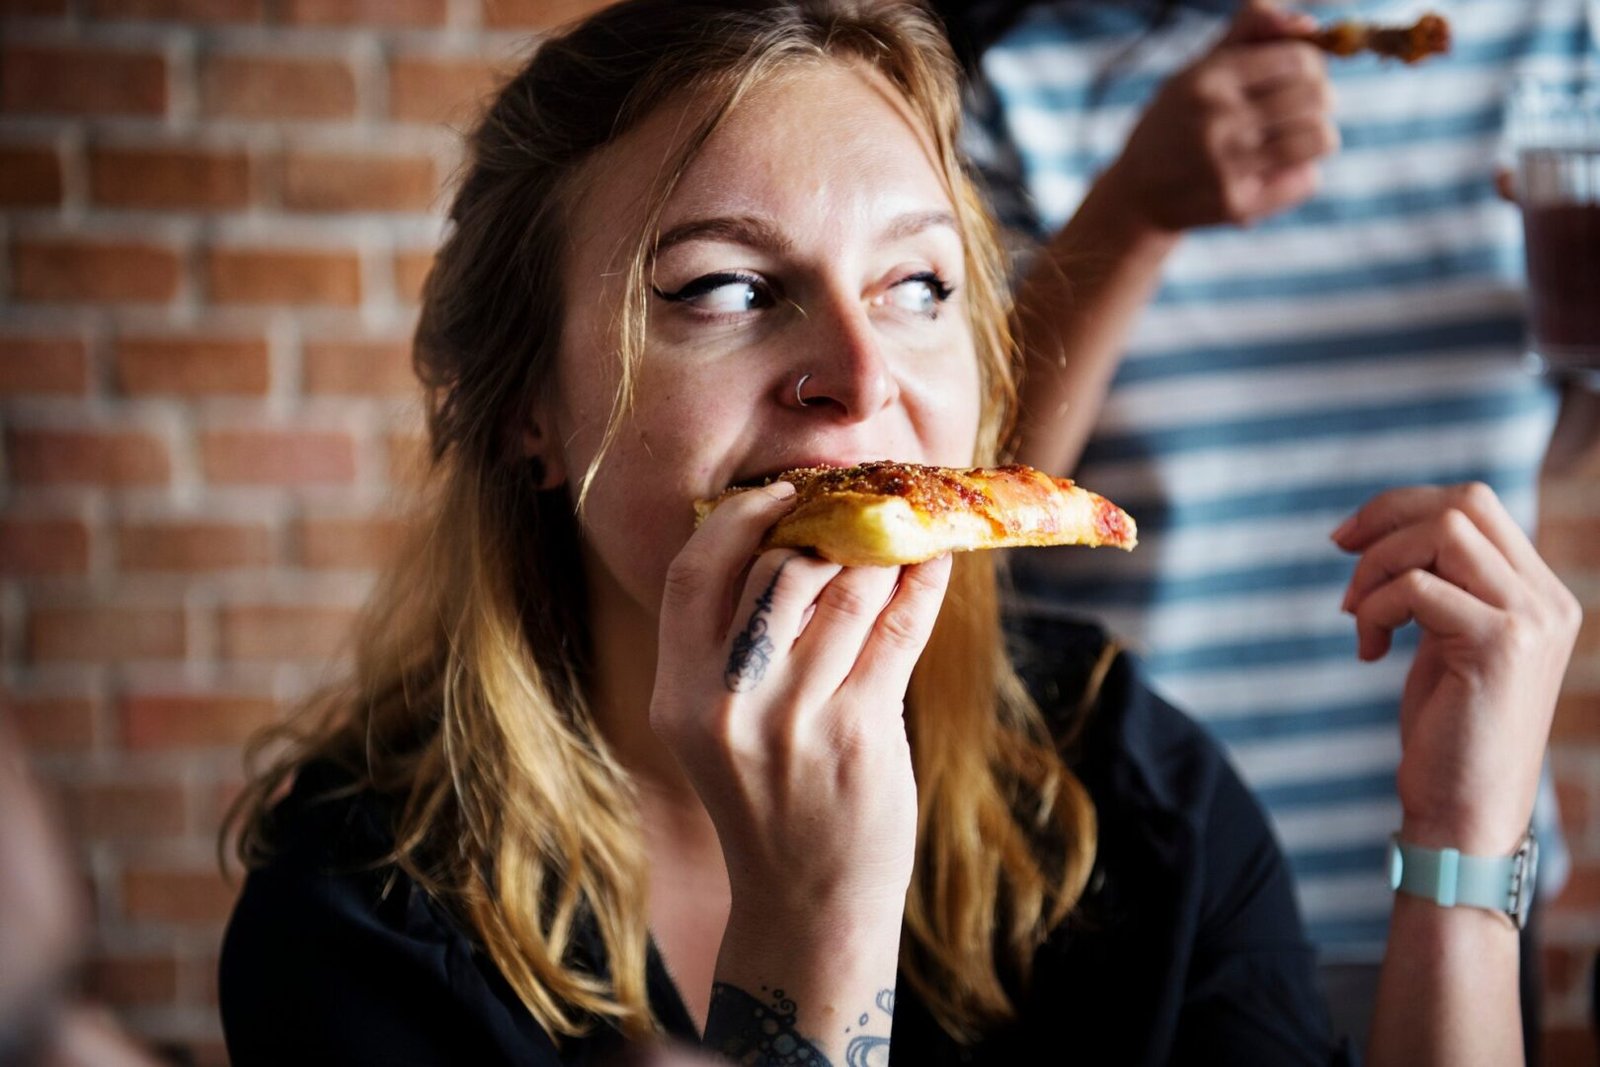 A woman eating pizza and looking unhappy